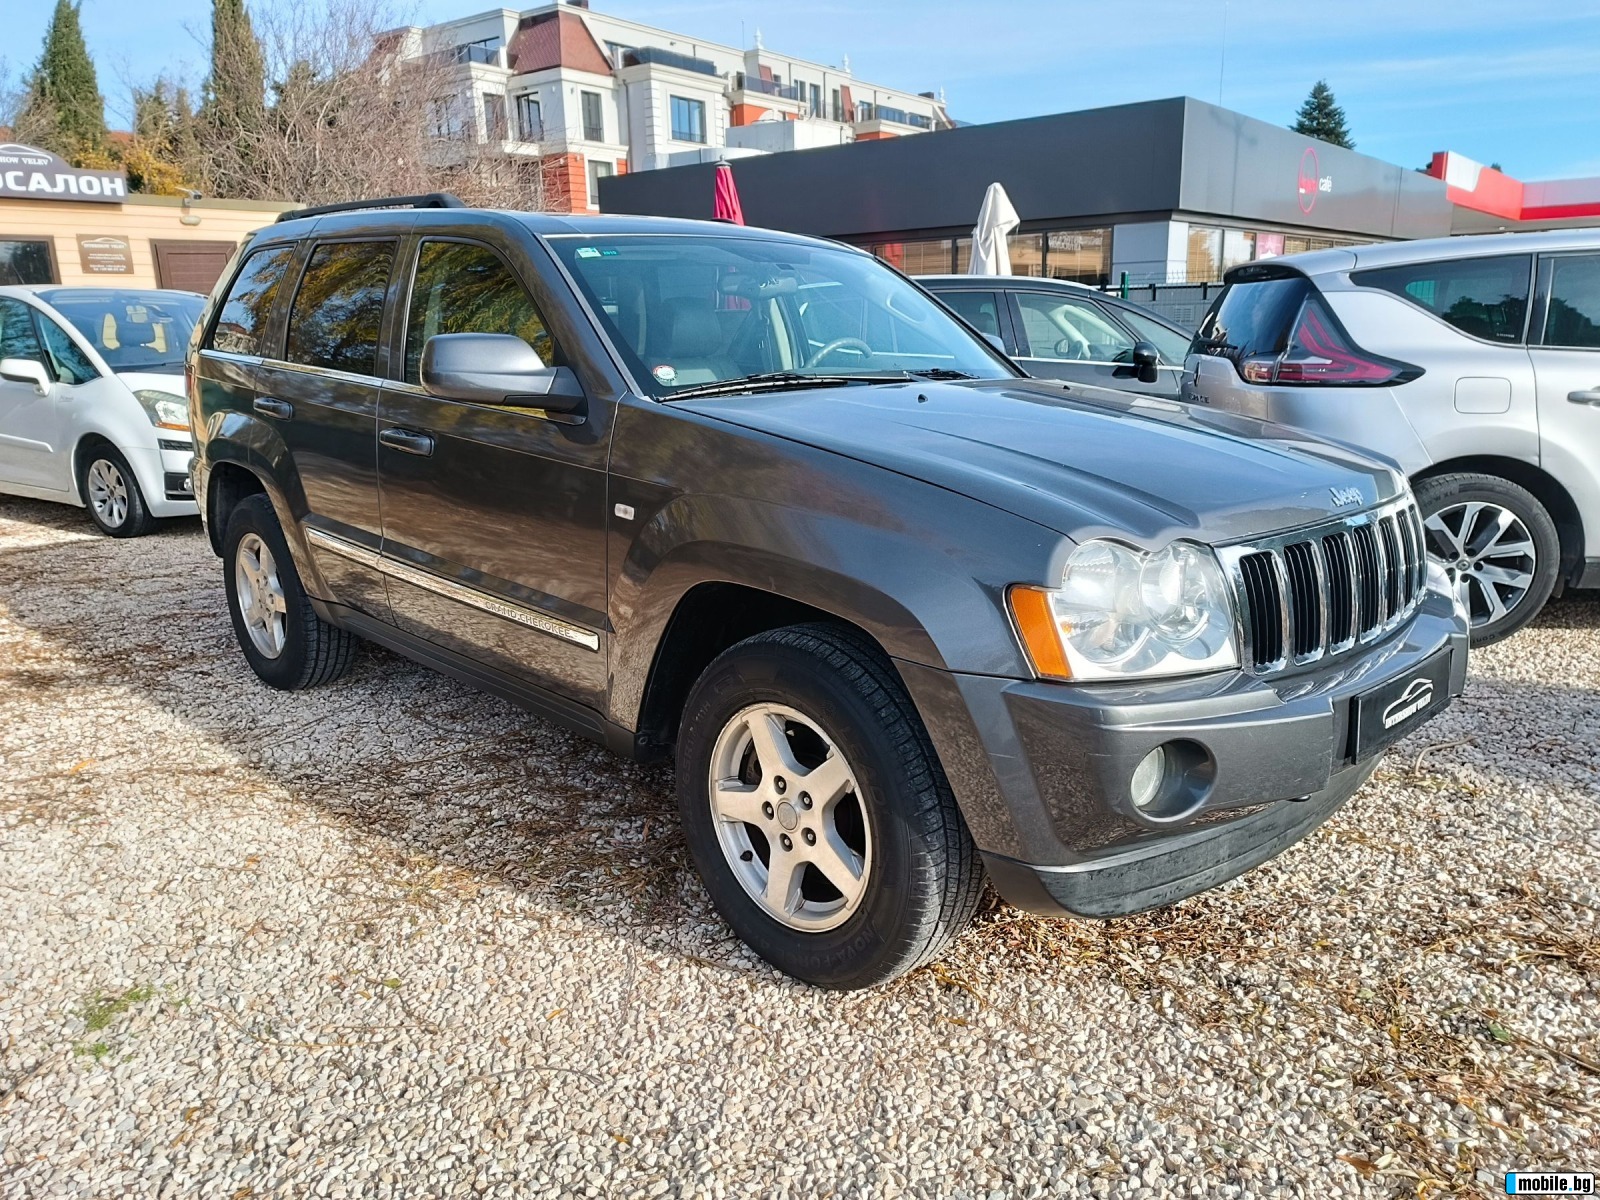 Jeep Grand cherokee 3.0 CRD Limited  | Mobile.bg   3